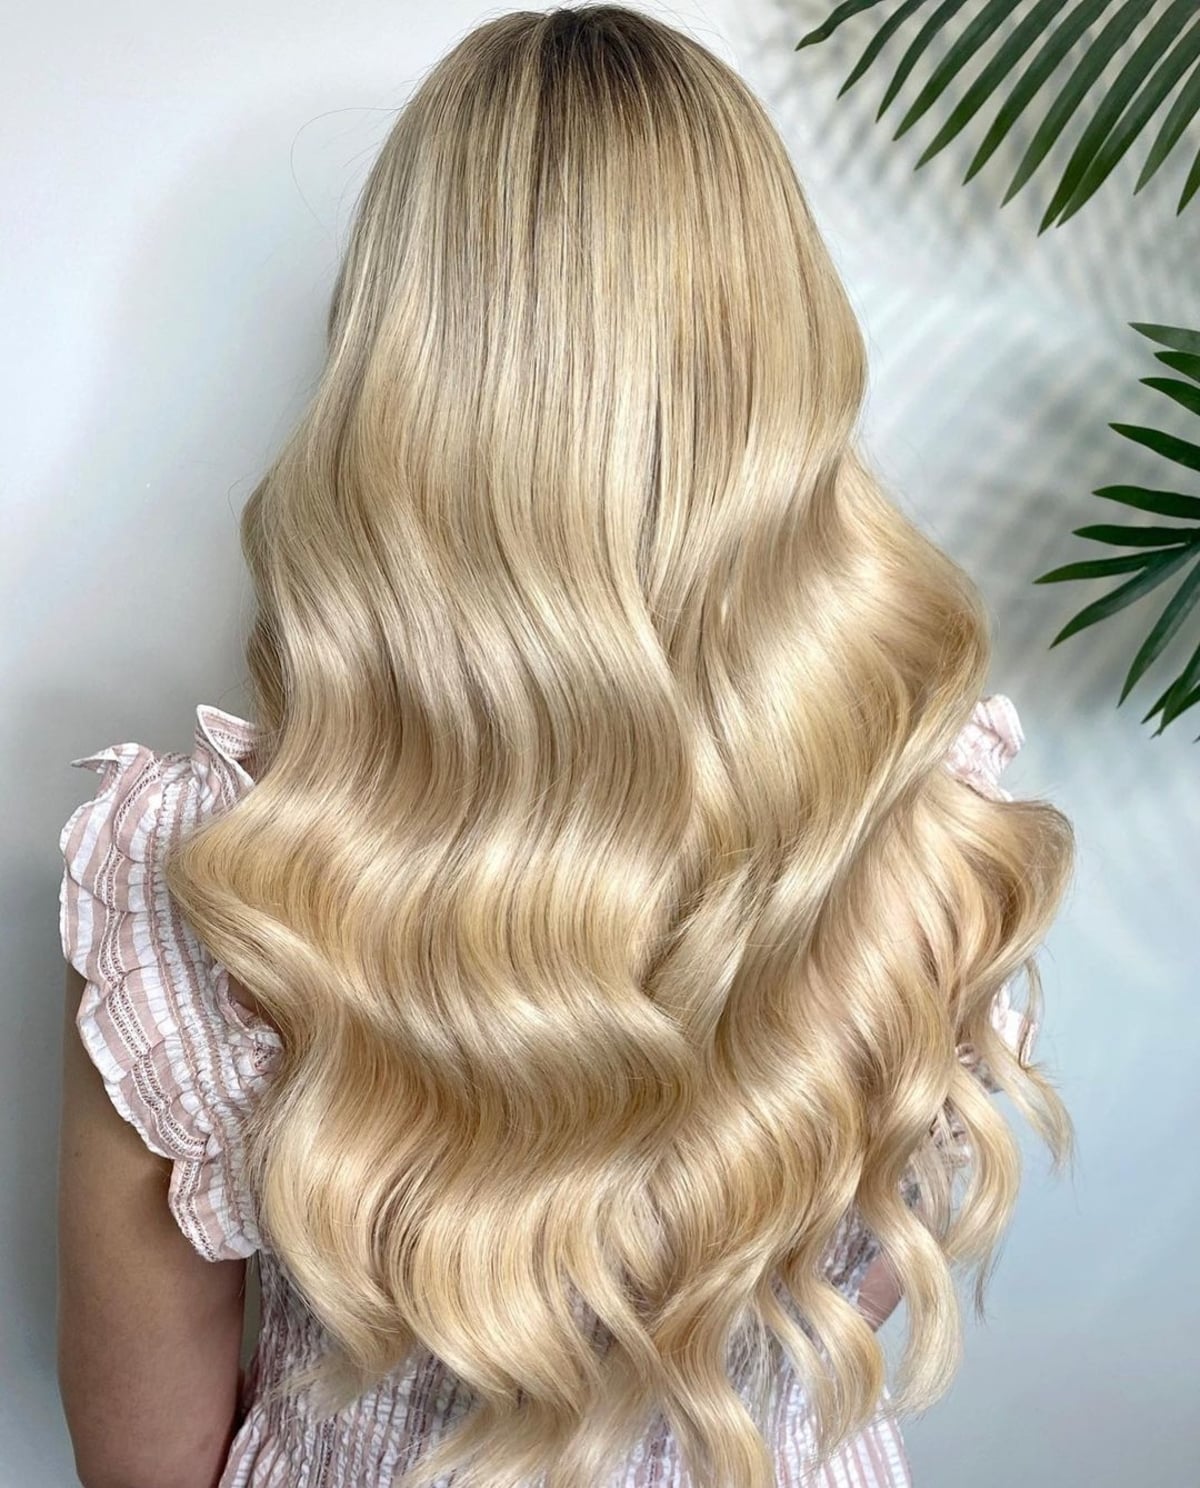 Long blonde wavy hairstyle